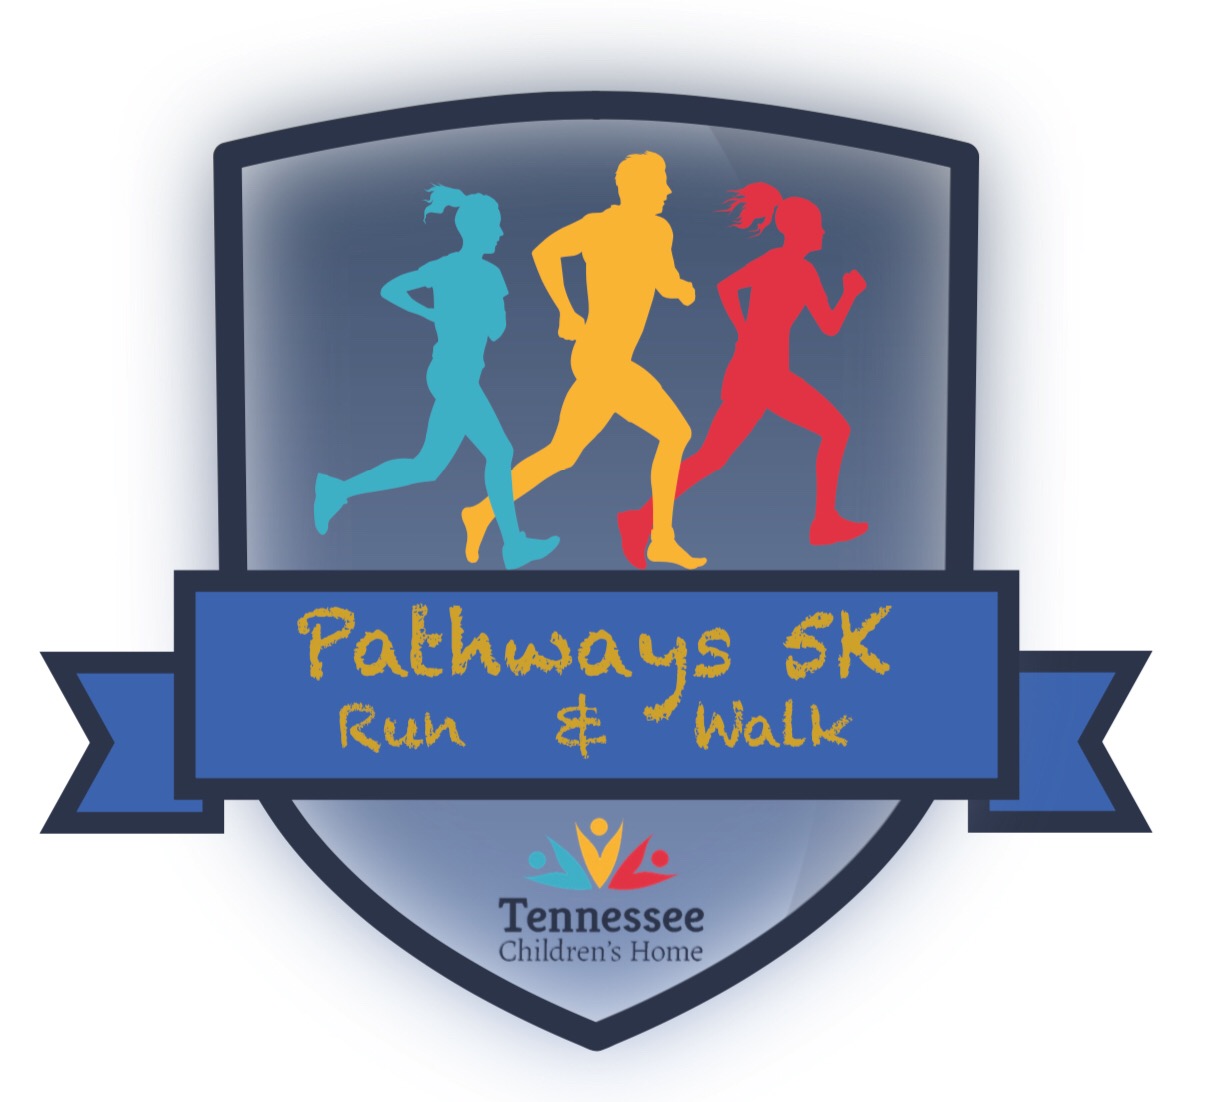 Pathways 5K for the Tennessee Children’s Home logo on RaceRaves